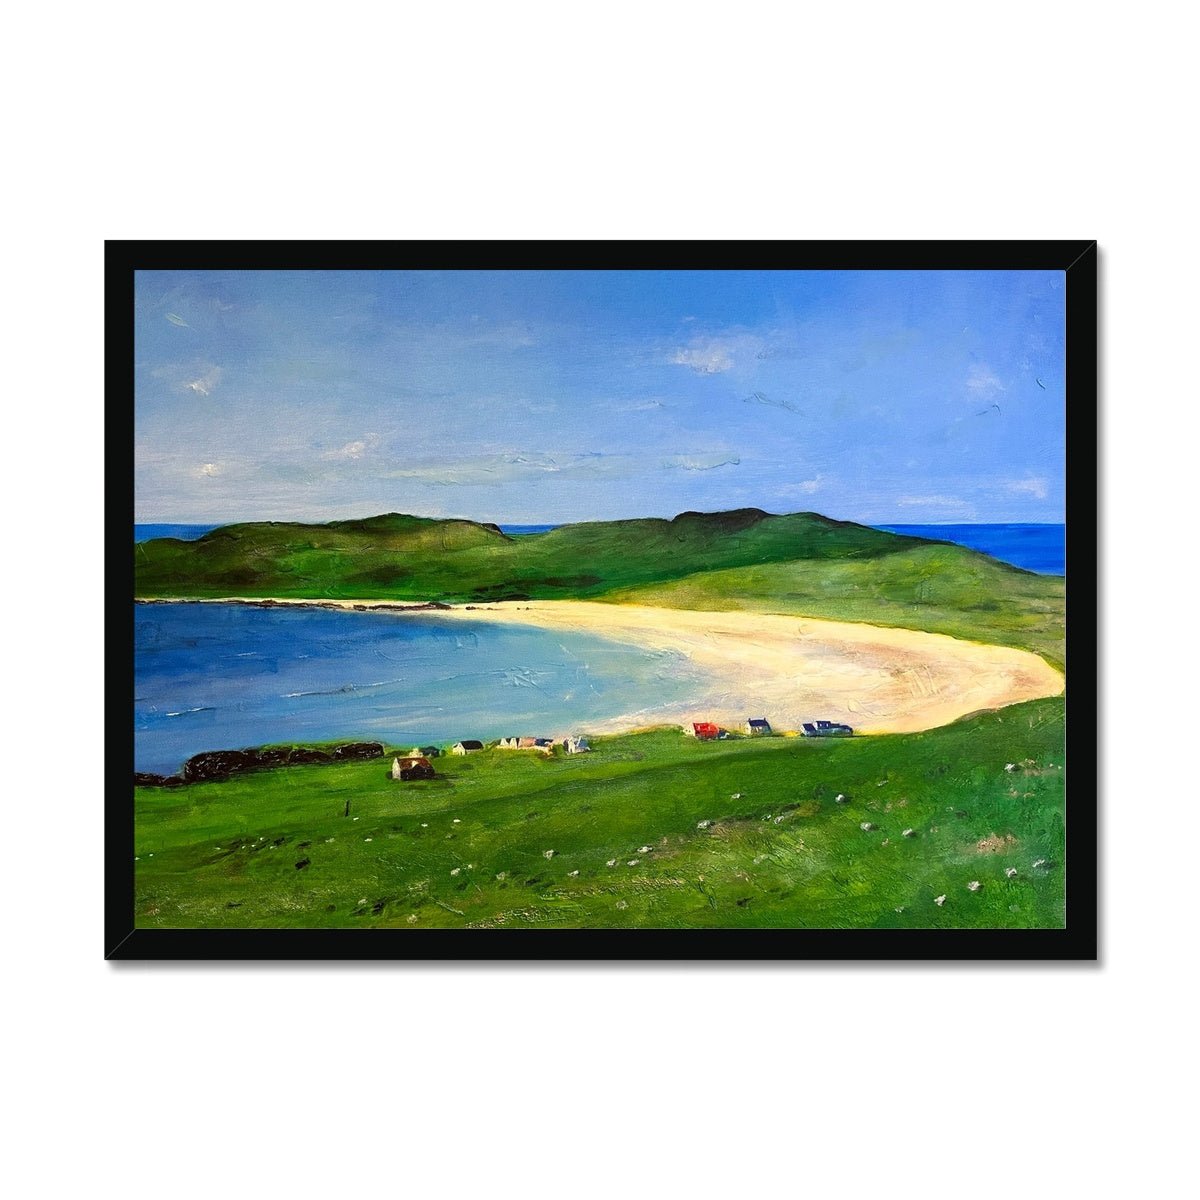 Balephuil Beach Tiree Painting | Framed Prints From Scotland-Framed Prints-Hebridean Islands Art Gallery-A2 Landscape-Black Frame-Paintings, Prints, Homeware, Art Gifts From Scotland By Scottish Artist Kevin Hunter